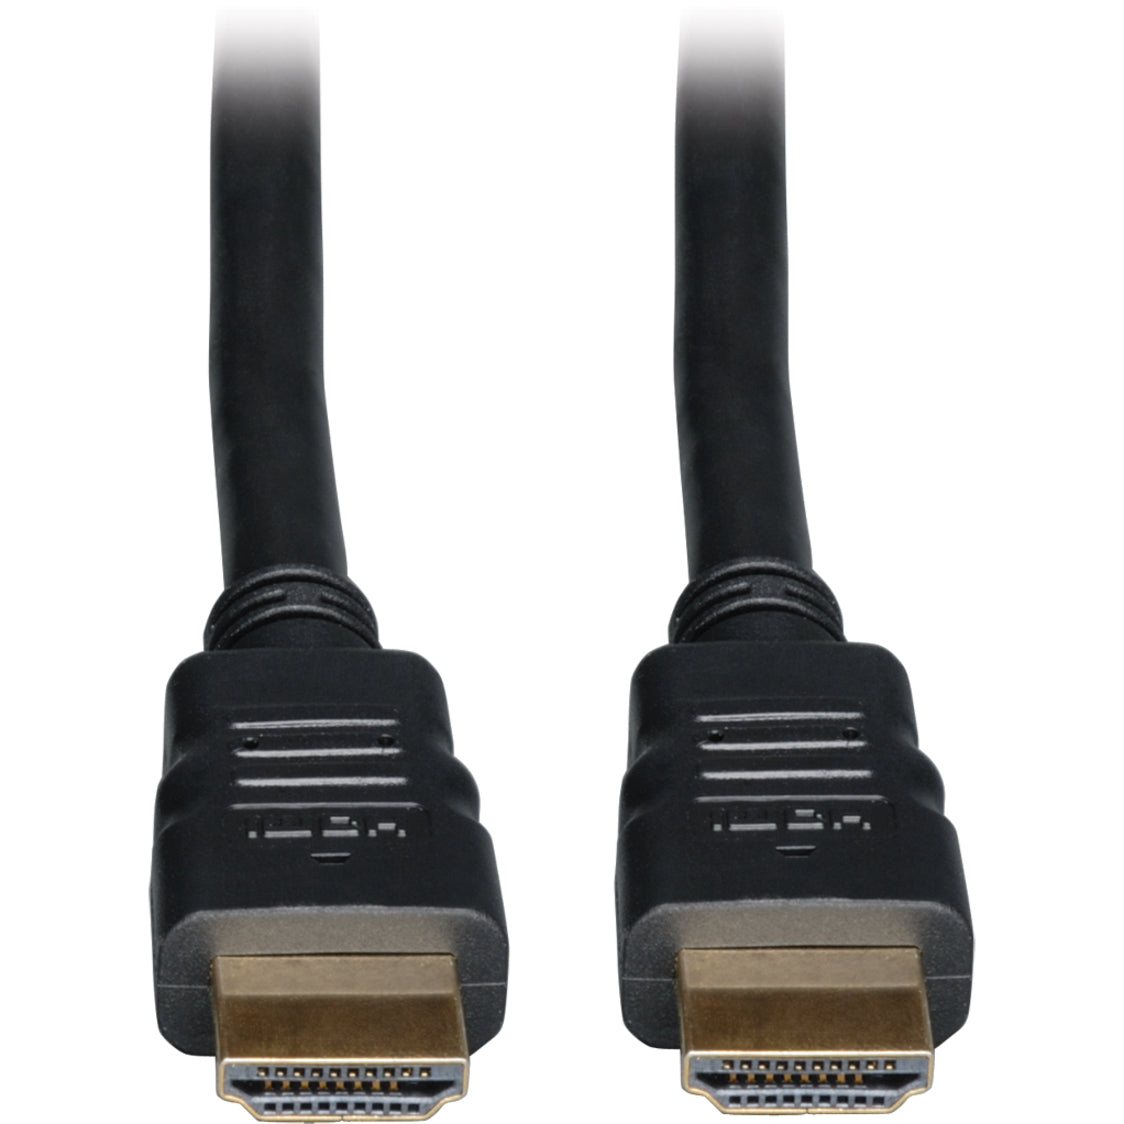 Tripp Lite P569-020 20-ft. High Speed with Ethernet HDMI Cable v1.4, 18 Gbit/s Data Transfer Rate, 3840 x 2160 Supported Resolution